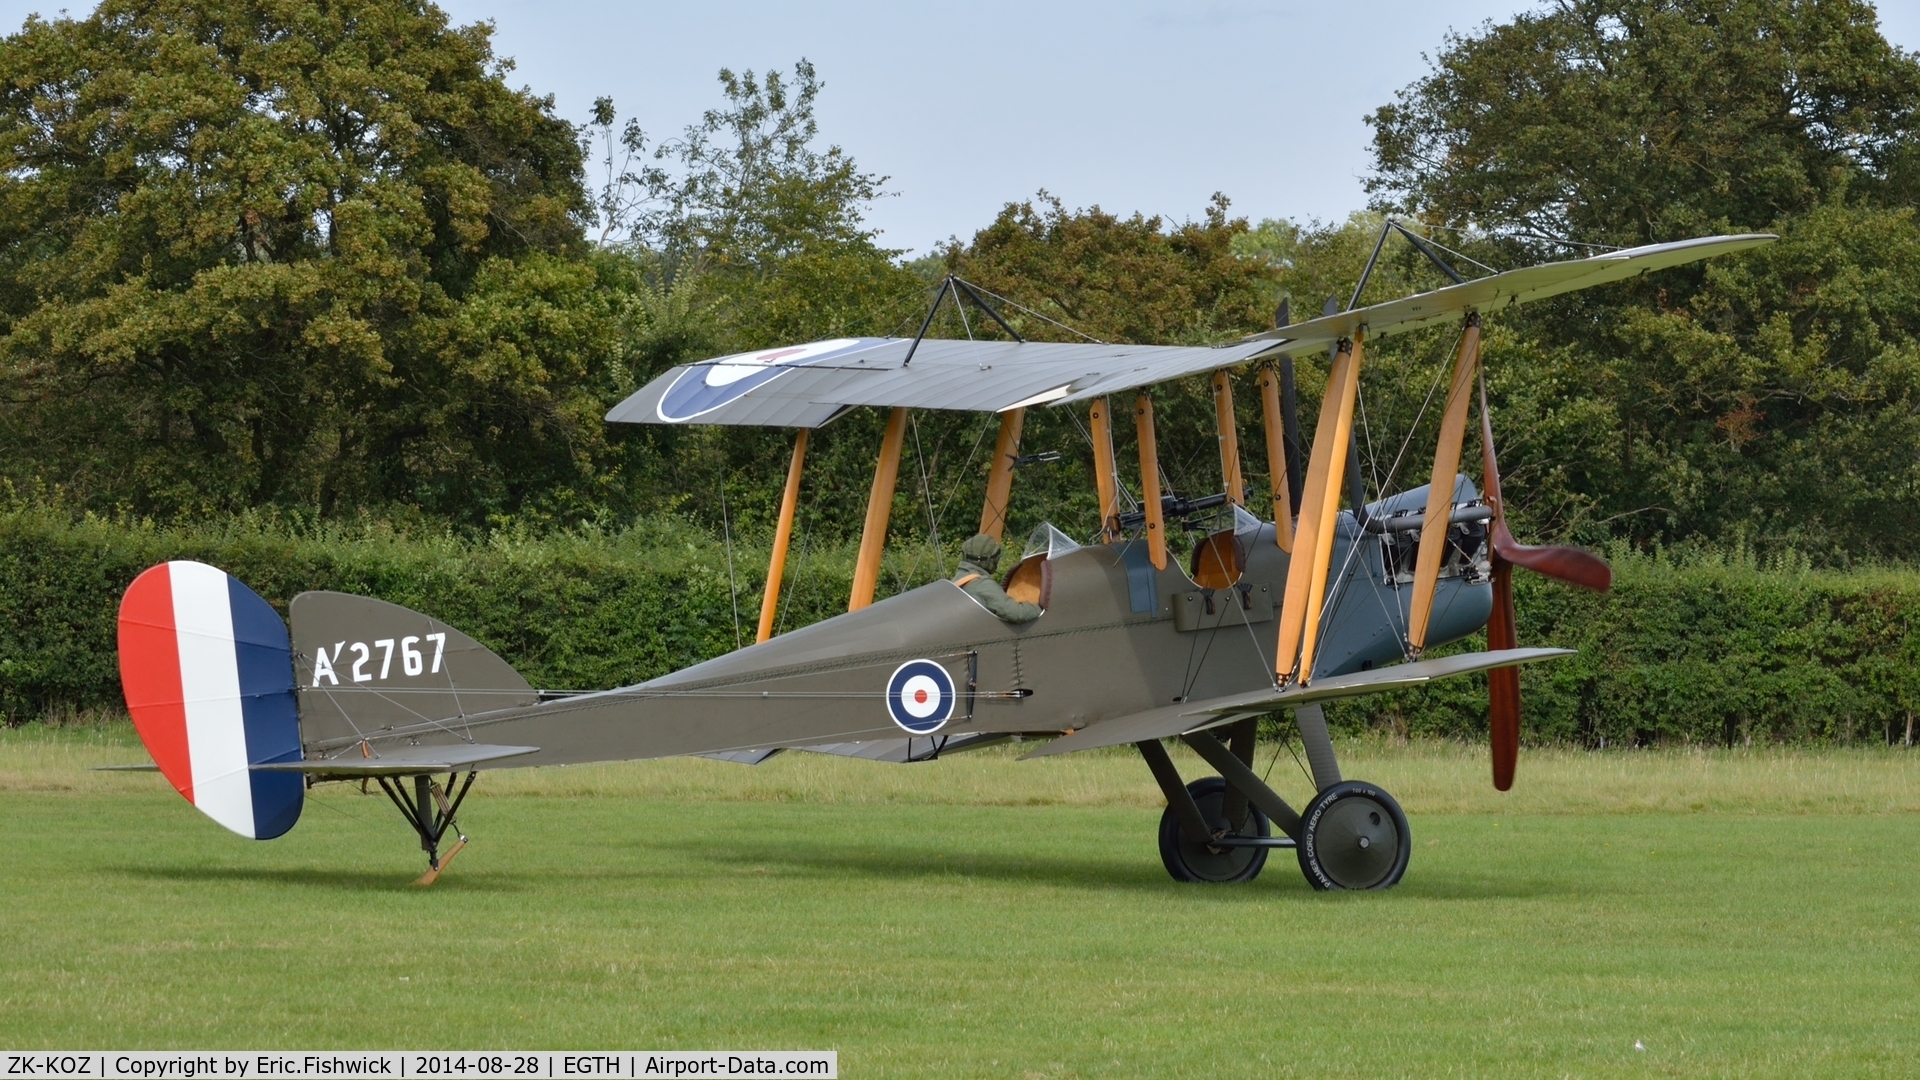 ZK-KOZ, 2014 Royal Aircraft Factory BE-2e Replica C/N 752, 2. ZK-KOZ (A'2767) preparing to depart The Shuttleworth Collection.